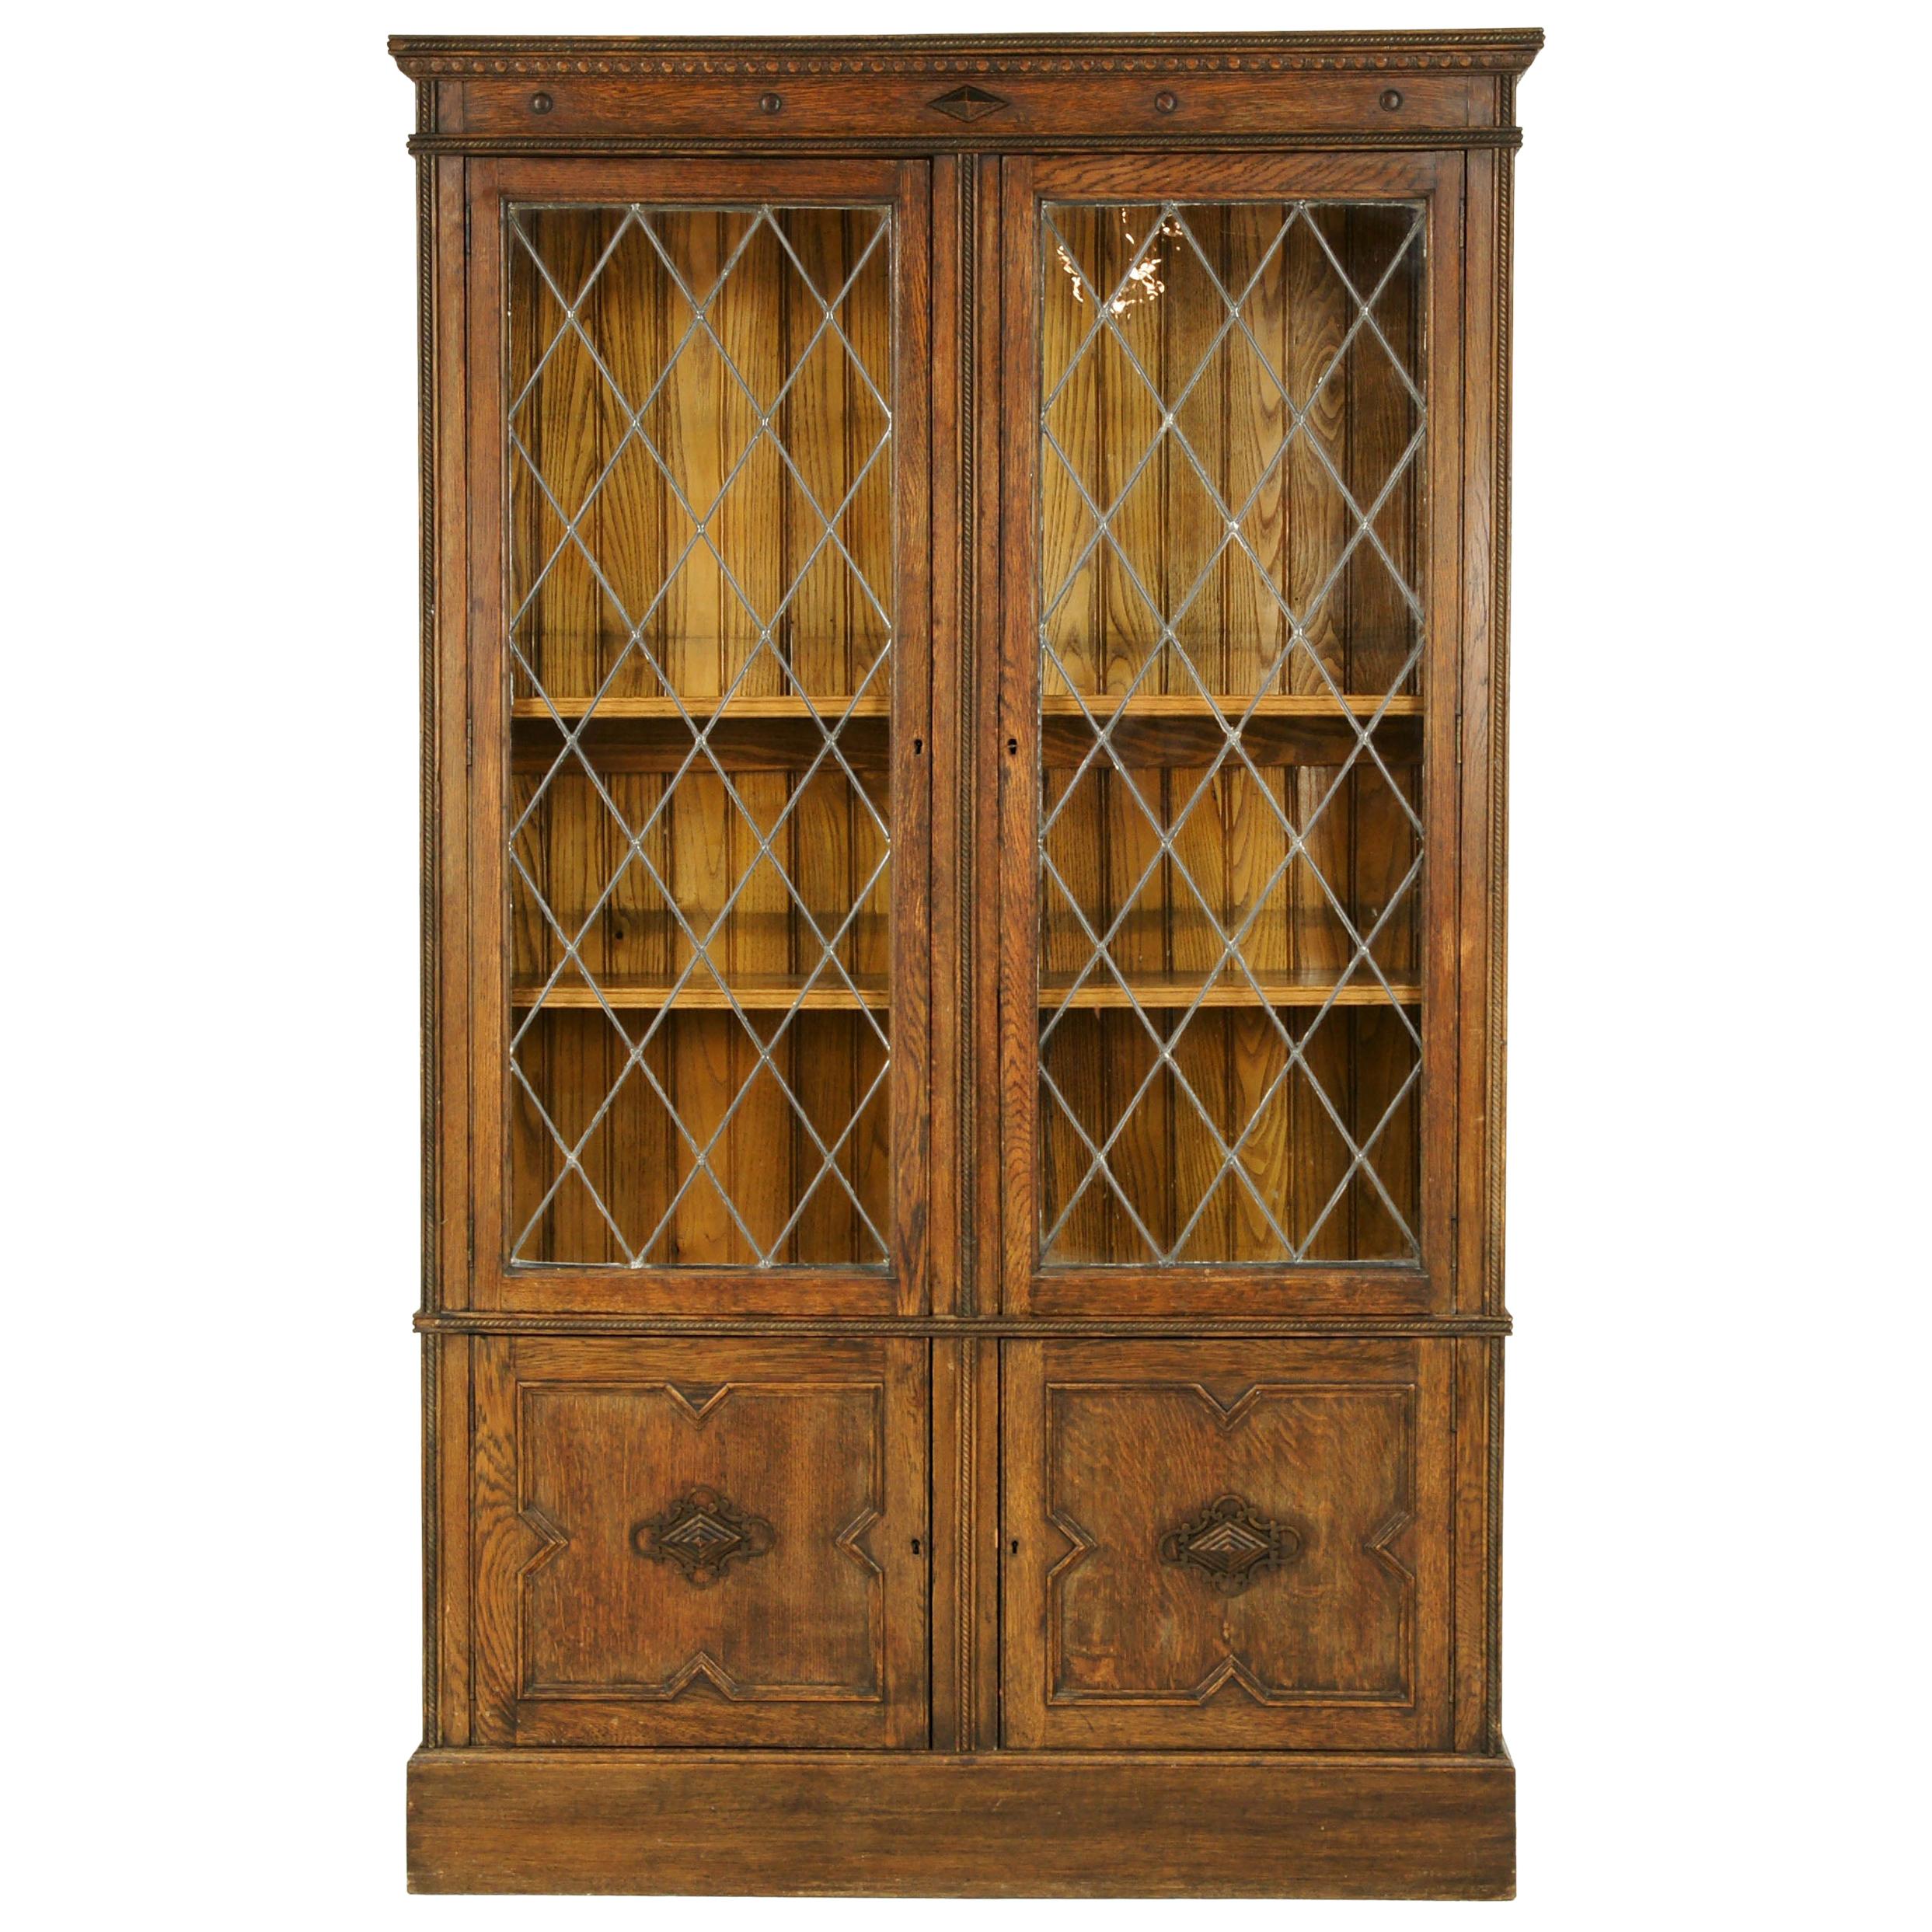 Antique Bookcase, Leaded Glass Bookcase, Display Cabinet, Arts and Crafts, B1356